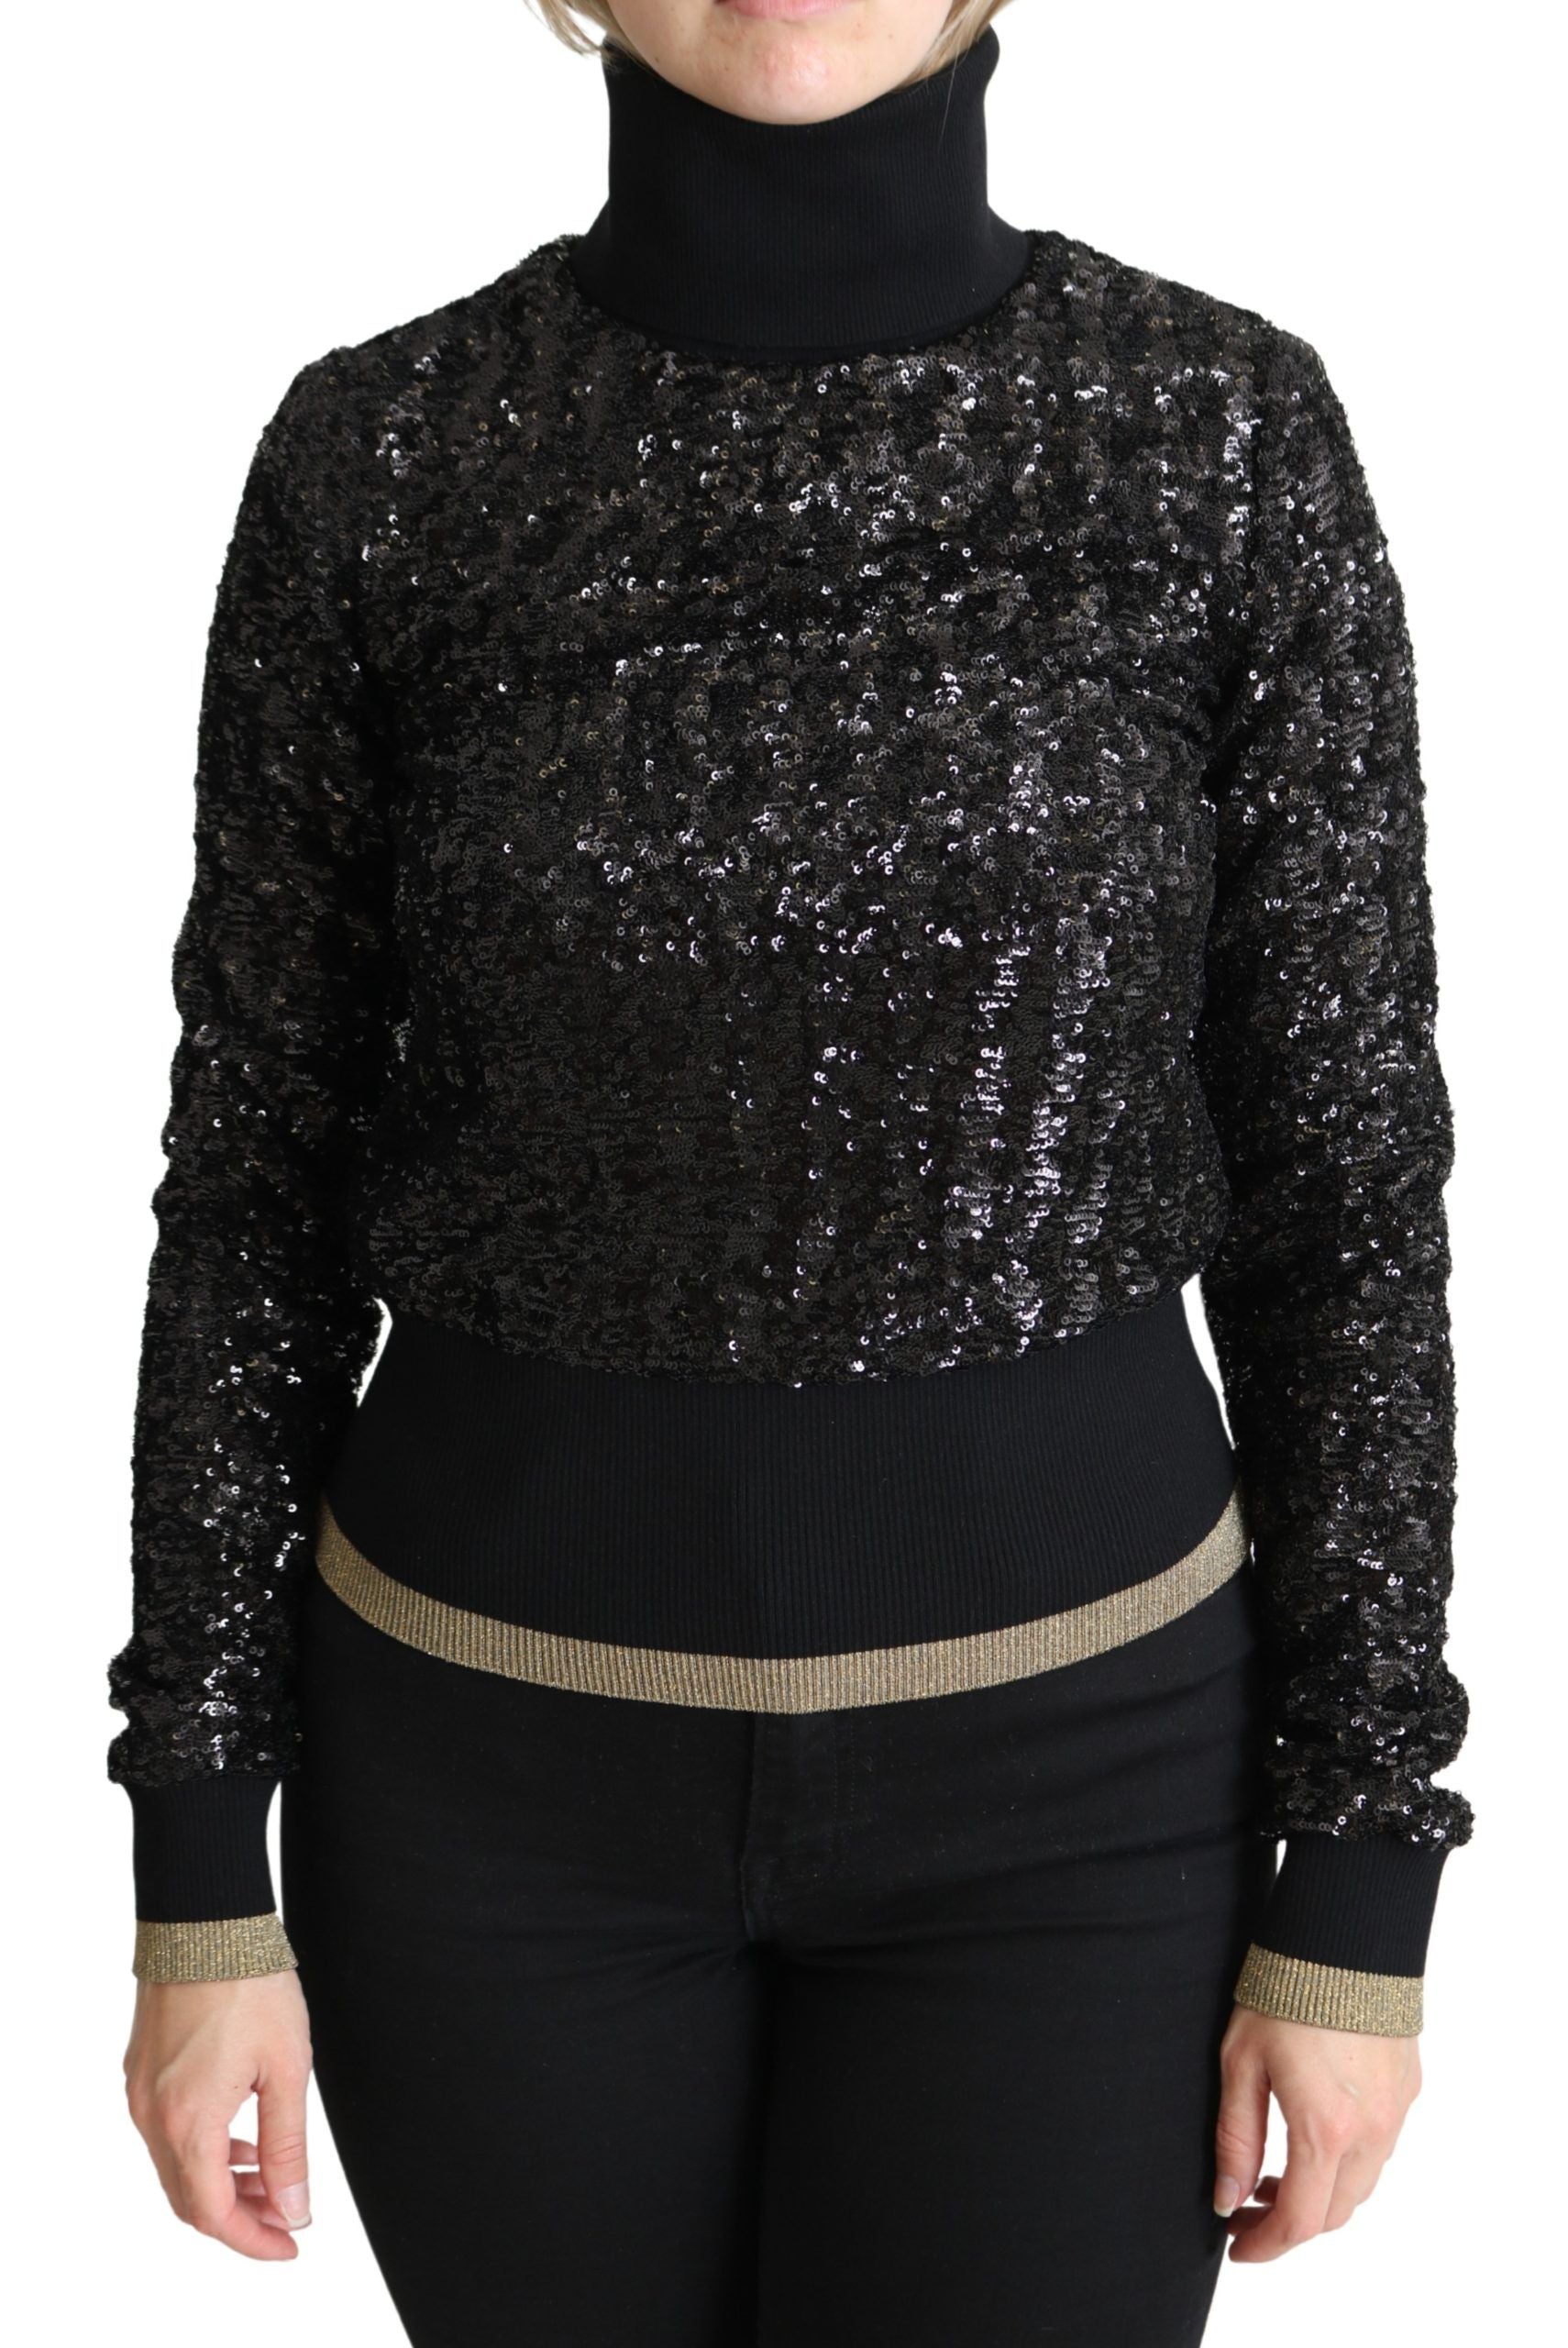 DOLCE & GABBANA Dolce & Gabbana  Sequined Knitted Turtle Neck Women's Sweater